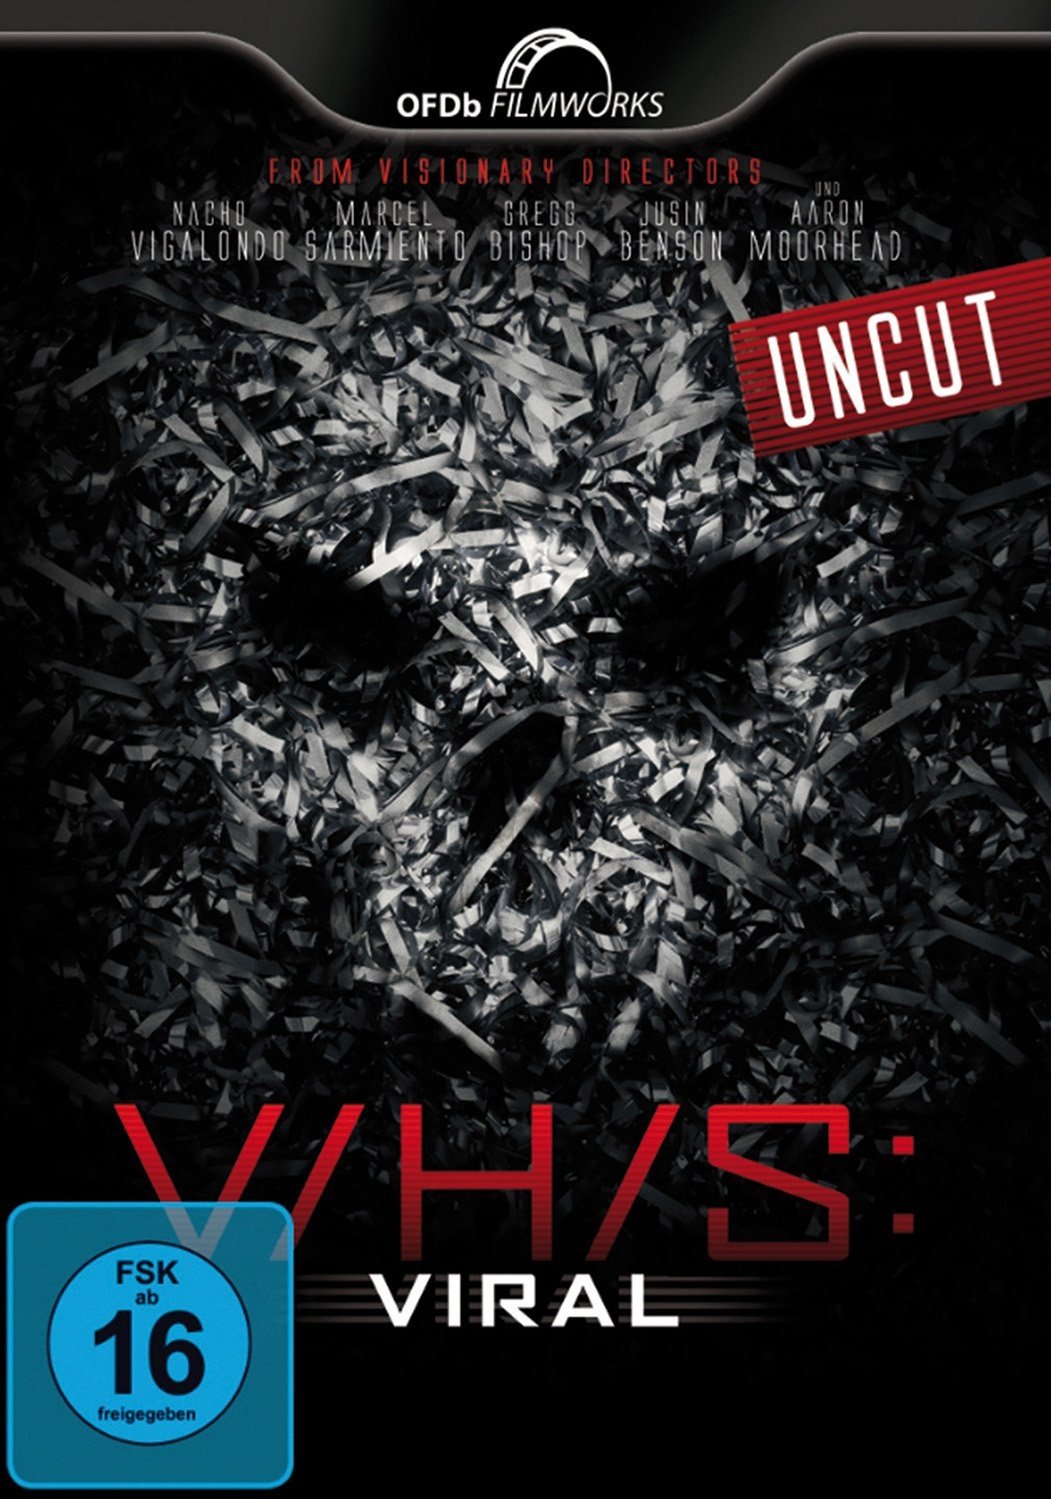 V/H/S: Viral - Uncut [Limited Collector's Edition]